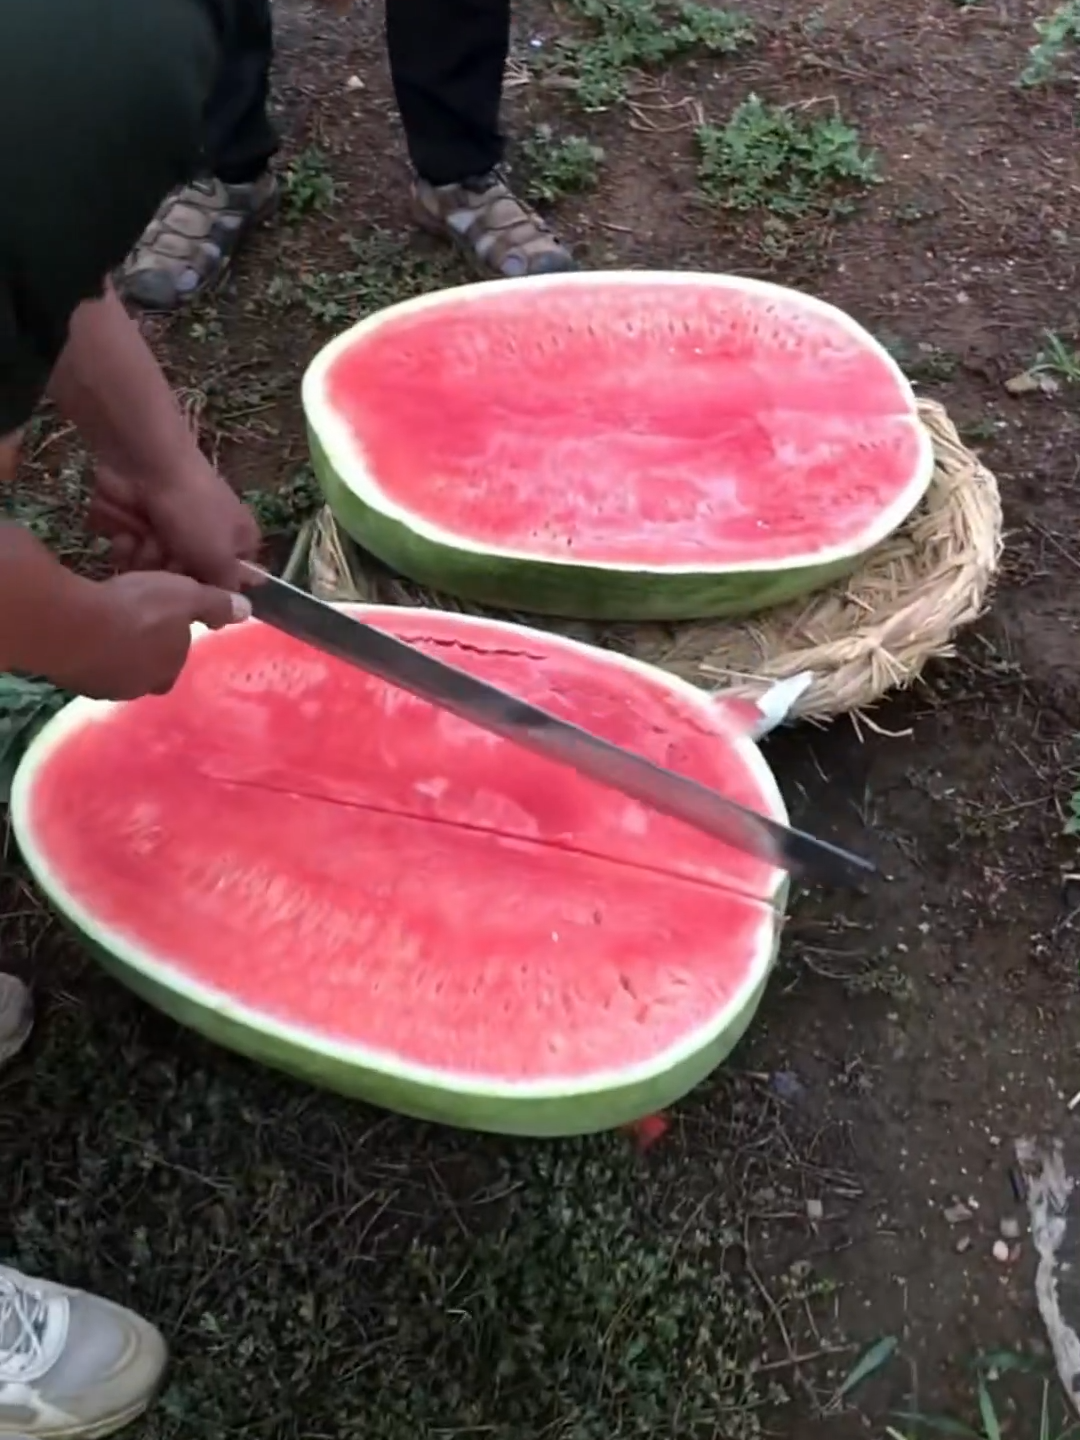 Is this the largest watermelon in the word?! They look juicy as well!